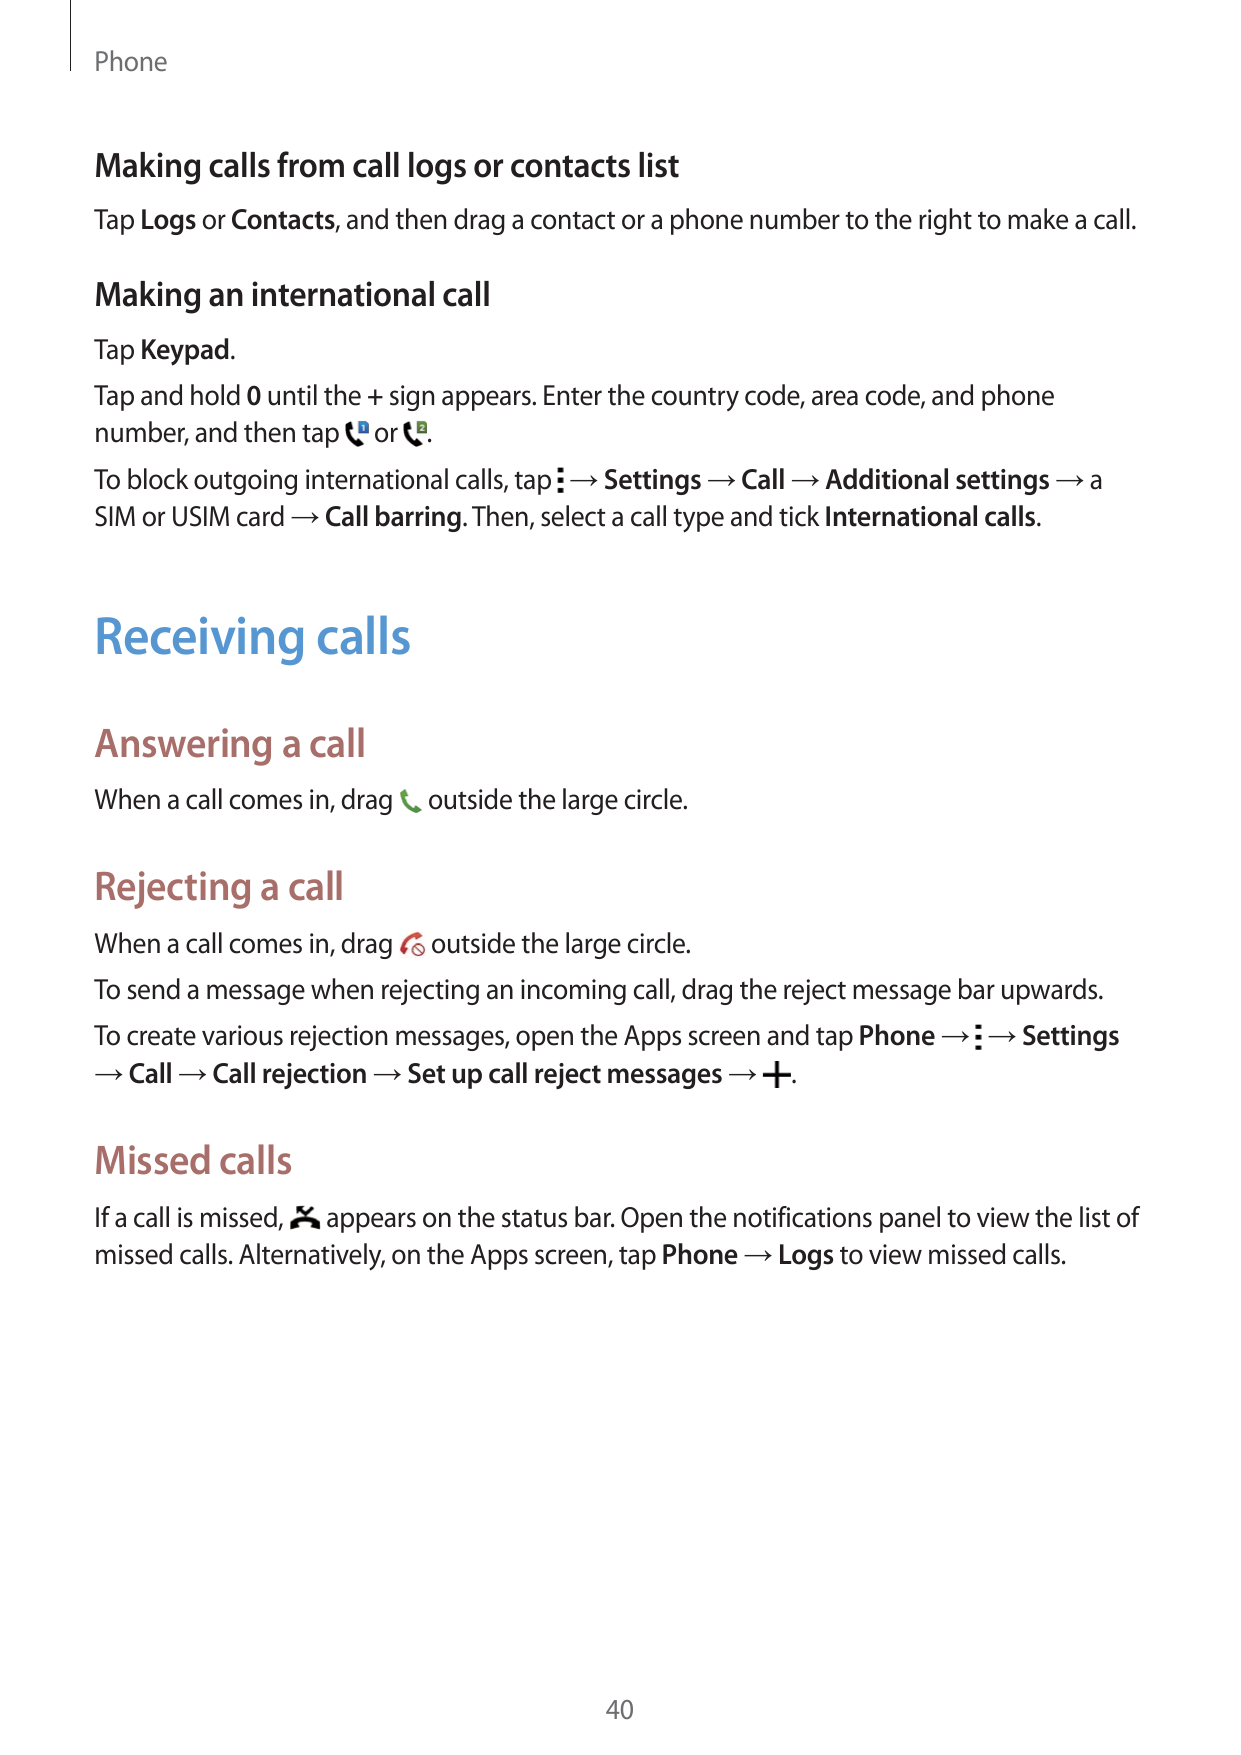 PhoneMaking calls from call logs or contacts listTap Logs or Contacts, and then drag a contact or a phone number to the right to